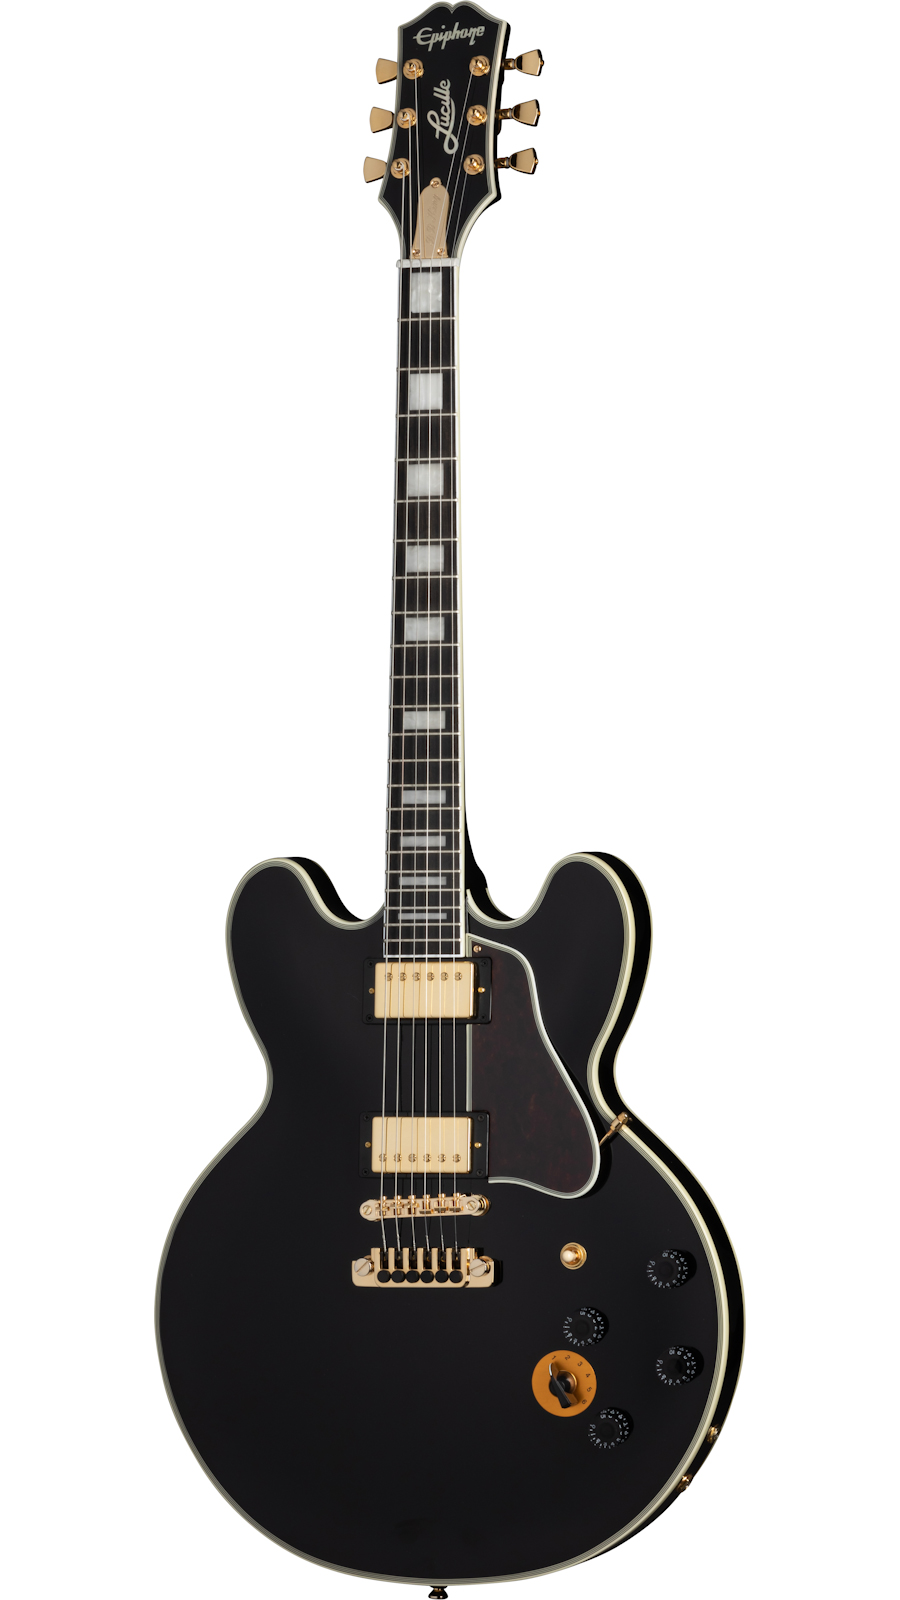 Epiphone lucille エピフォン　ルシール　エボニー指板